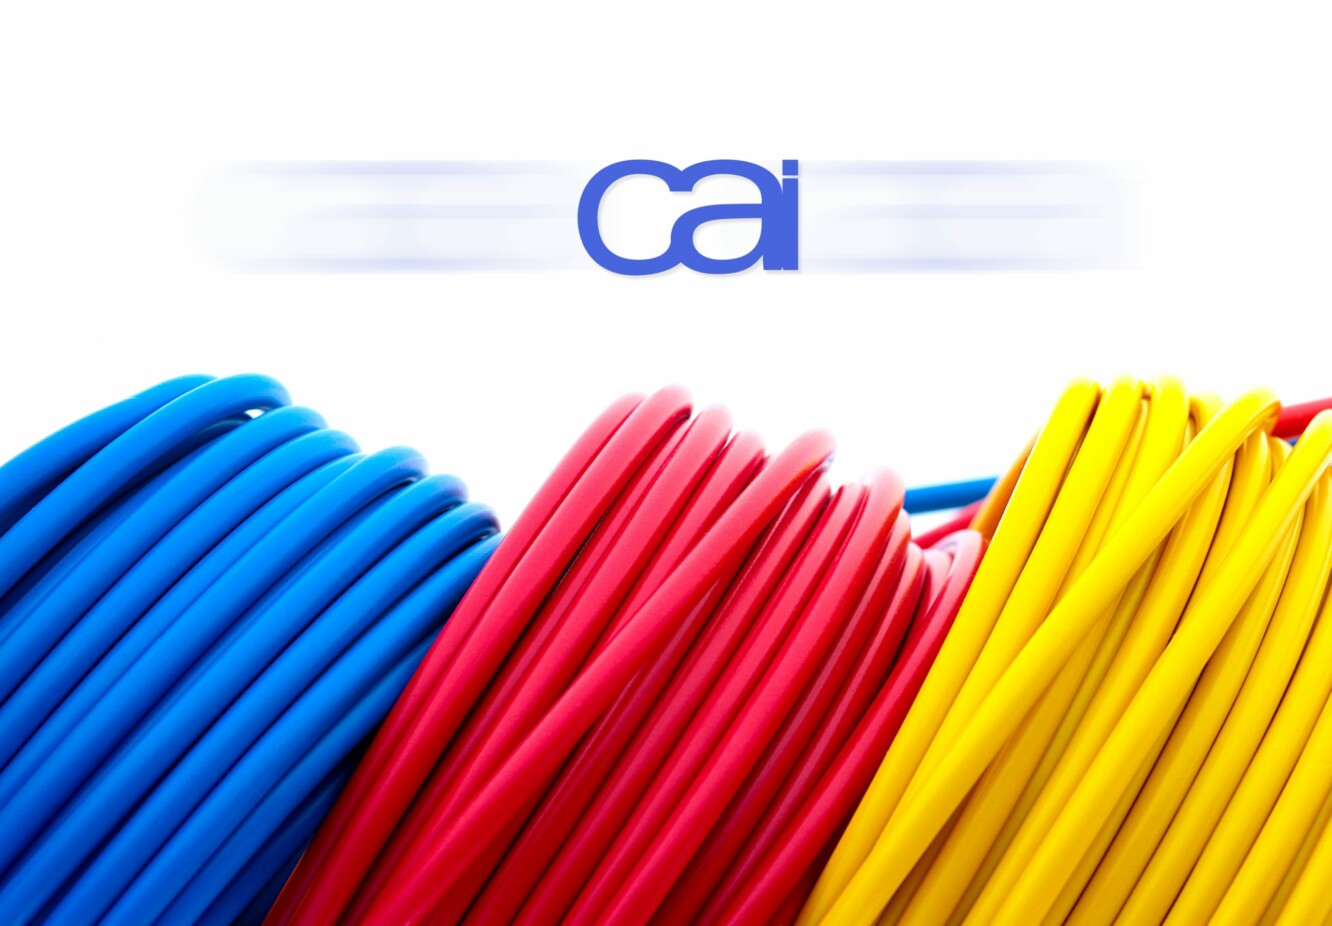 Filler Material for Custom Cable Assemblies & Why It’s Needed